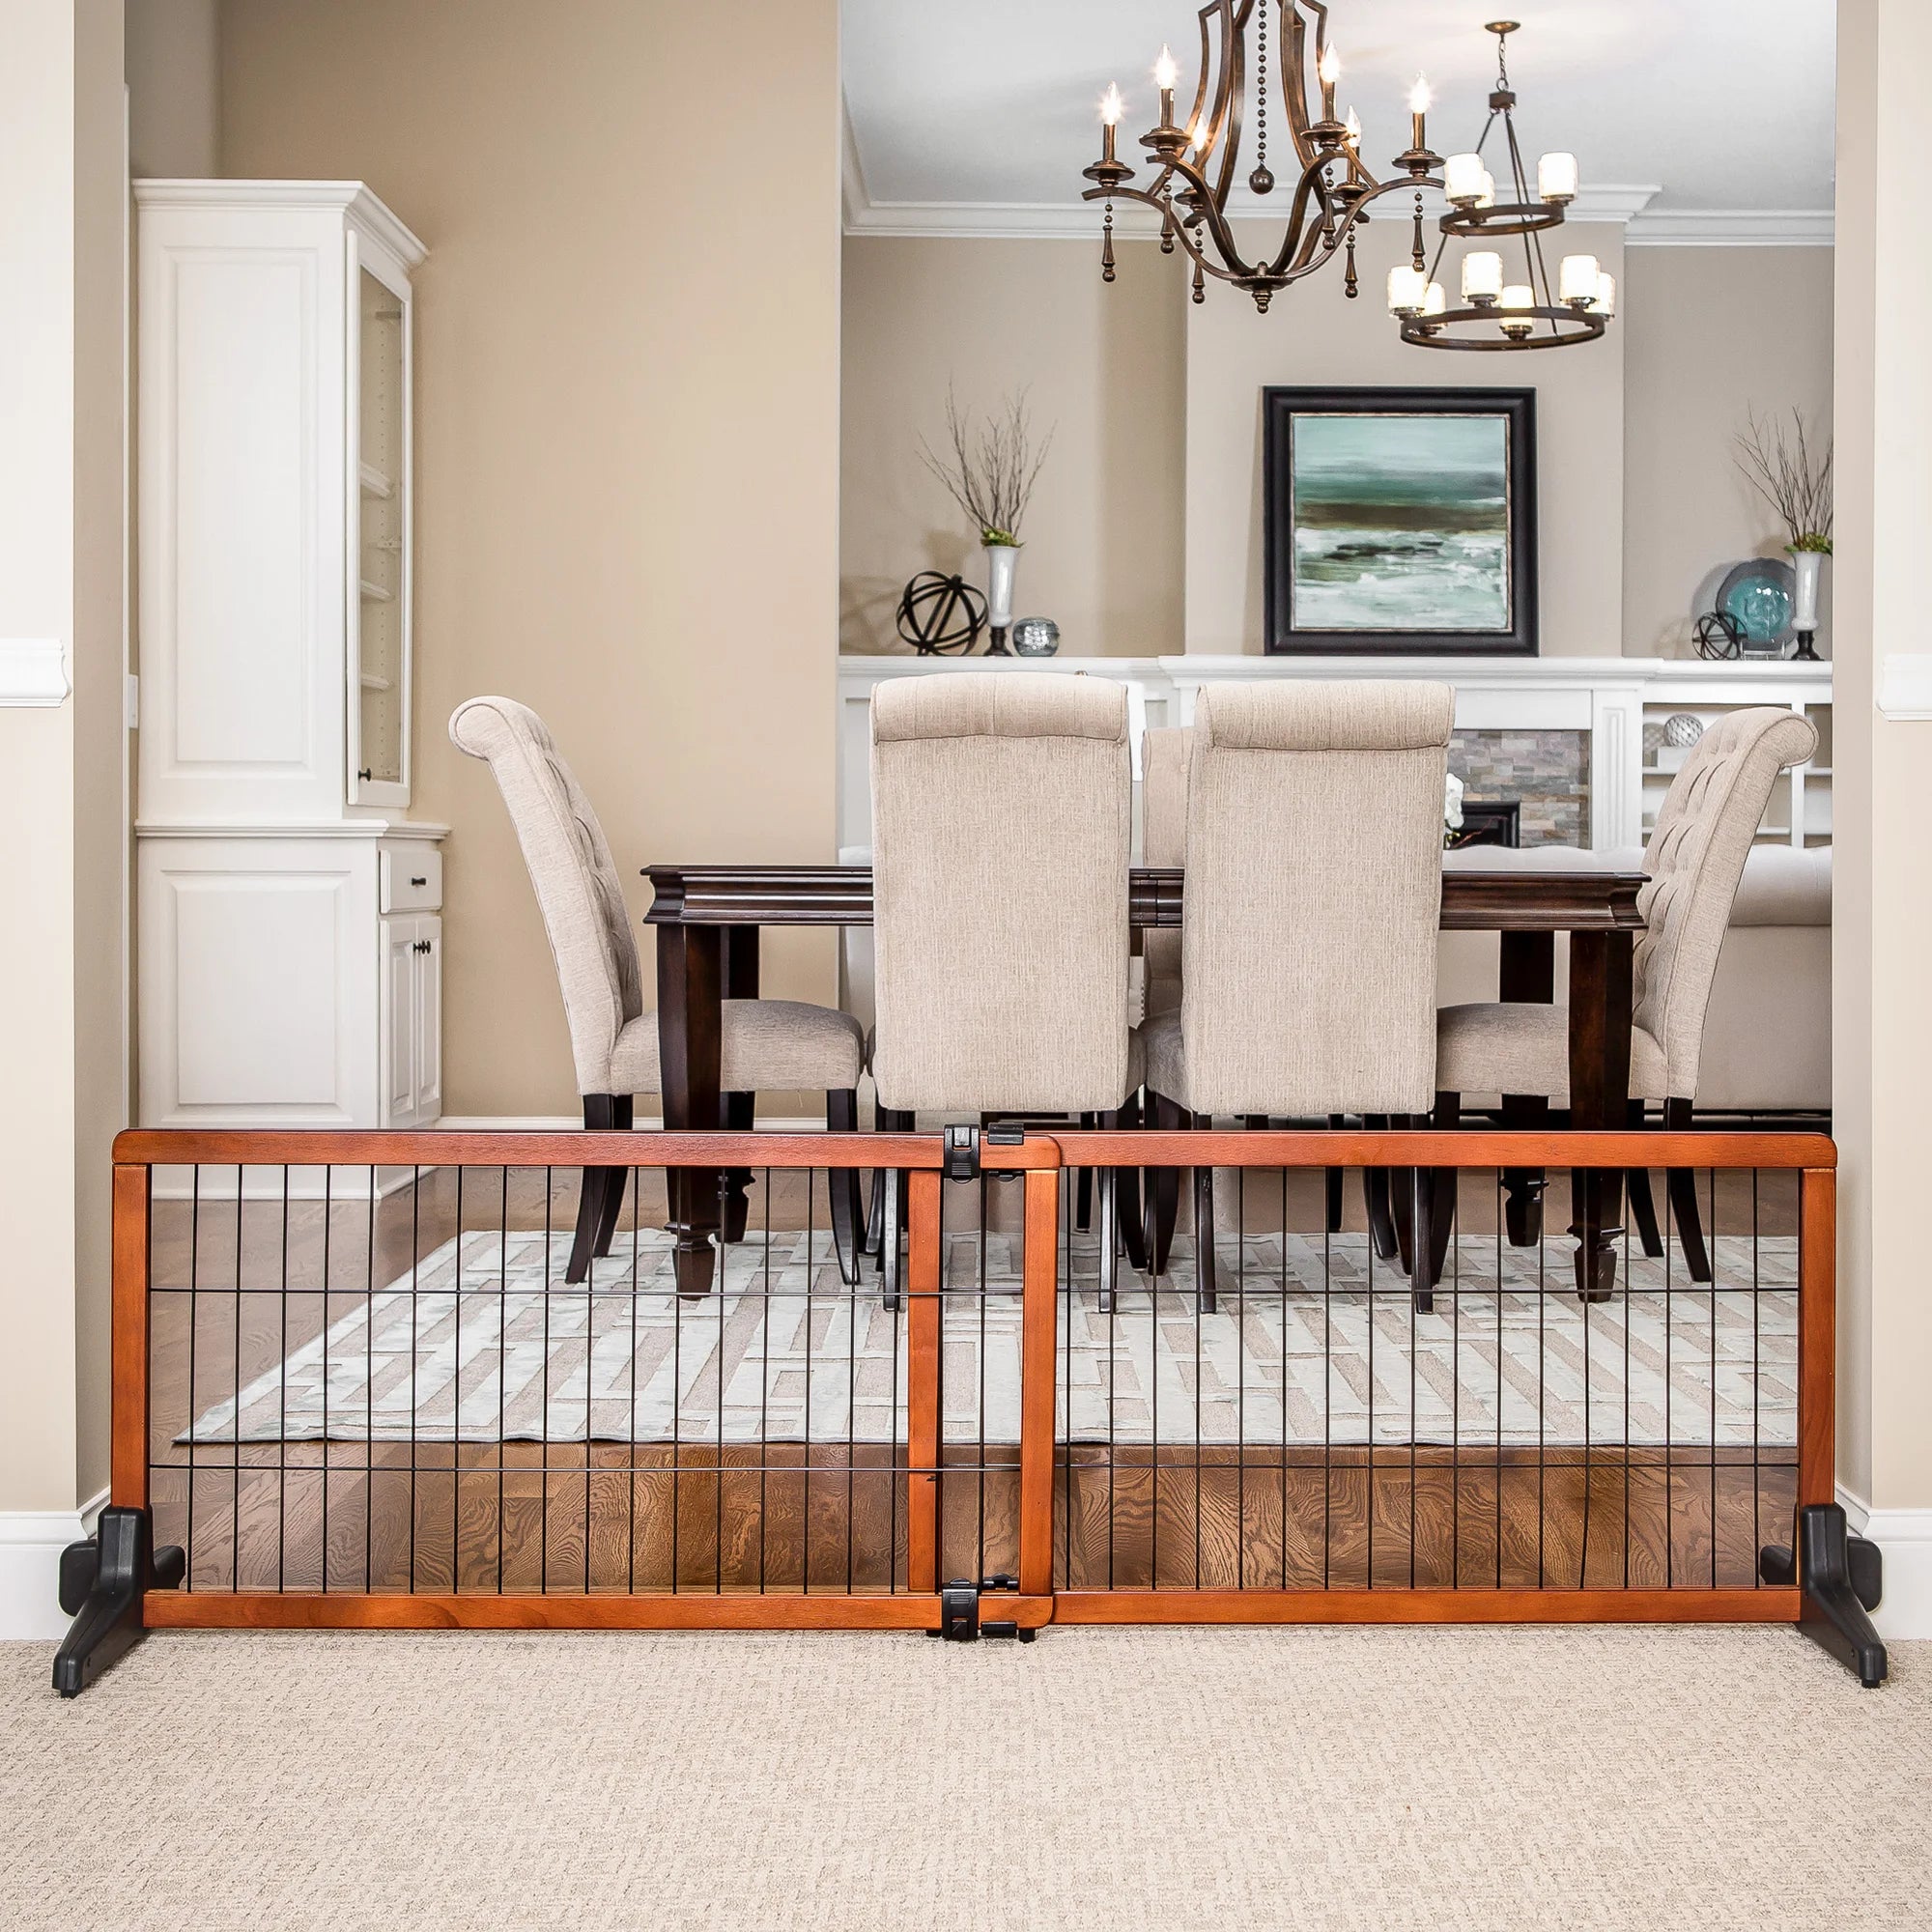 Design Paw Extra Wide Freestanding Pet Gate set up in dining room.